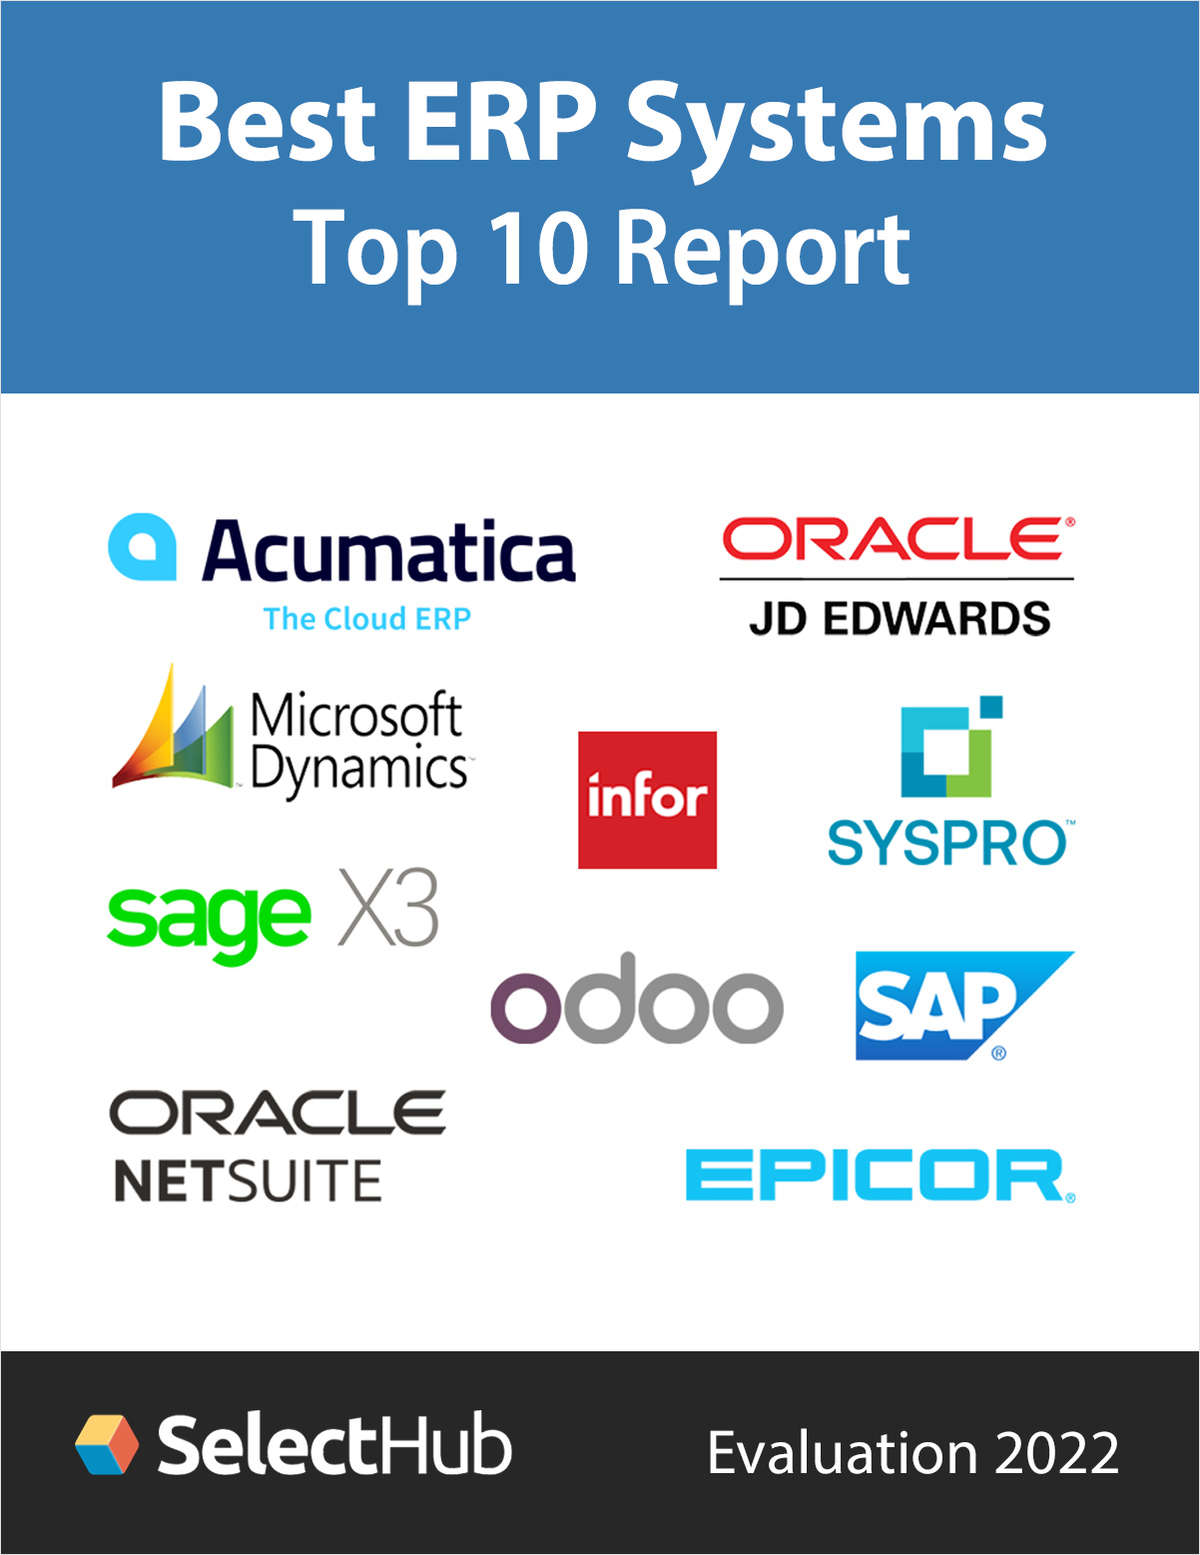 The Best ERP Systems for 2022--Top 10 Report